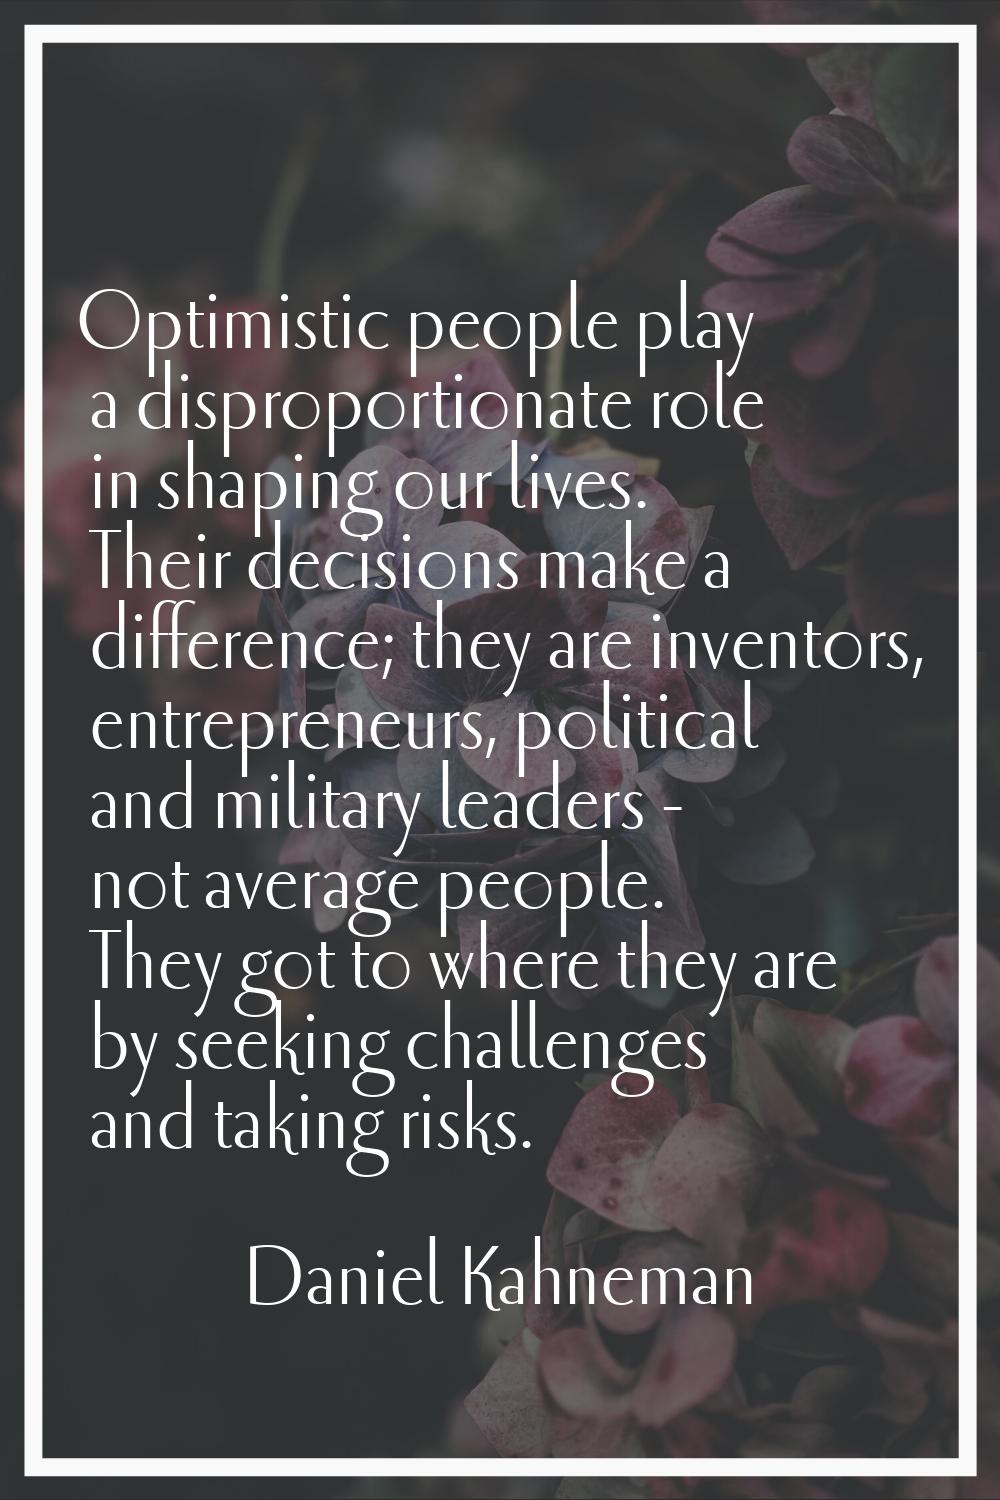 Optimistic people play a disproportionate role in shaping our lives. Their decisions make a differe